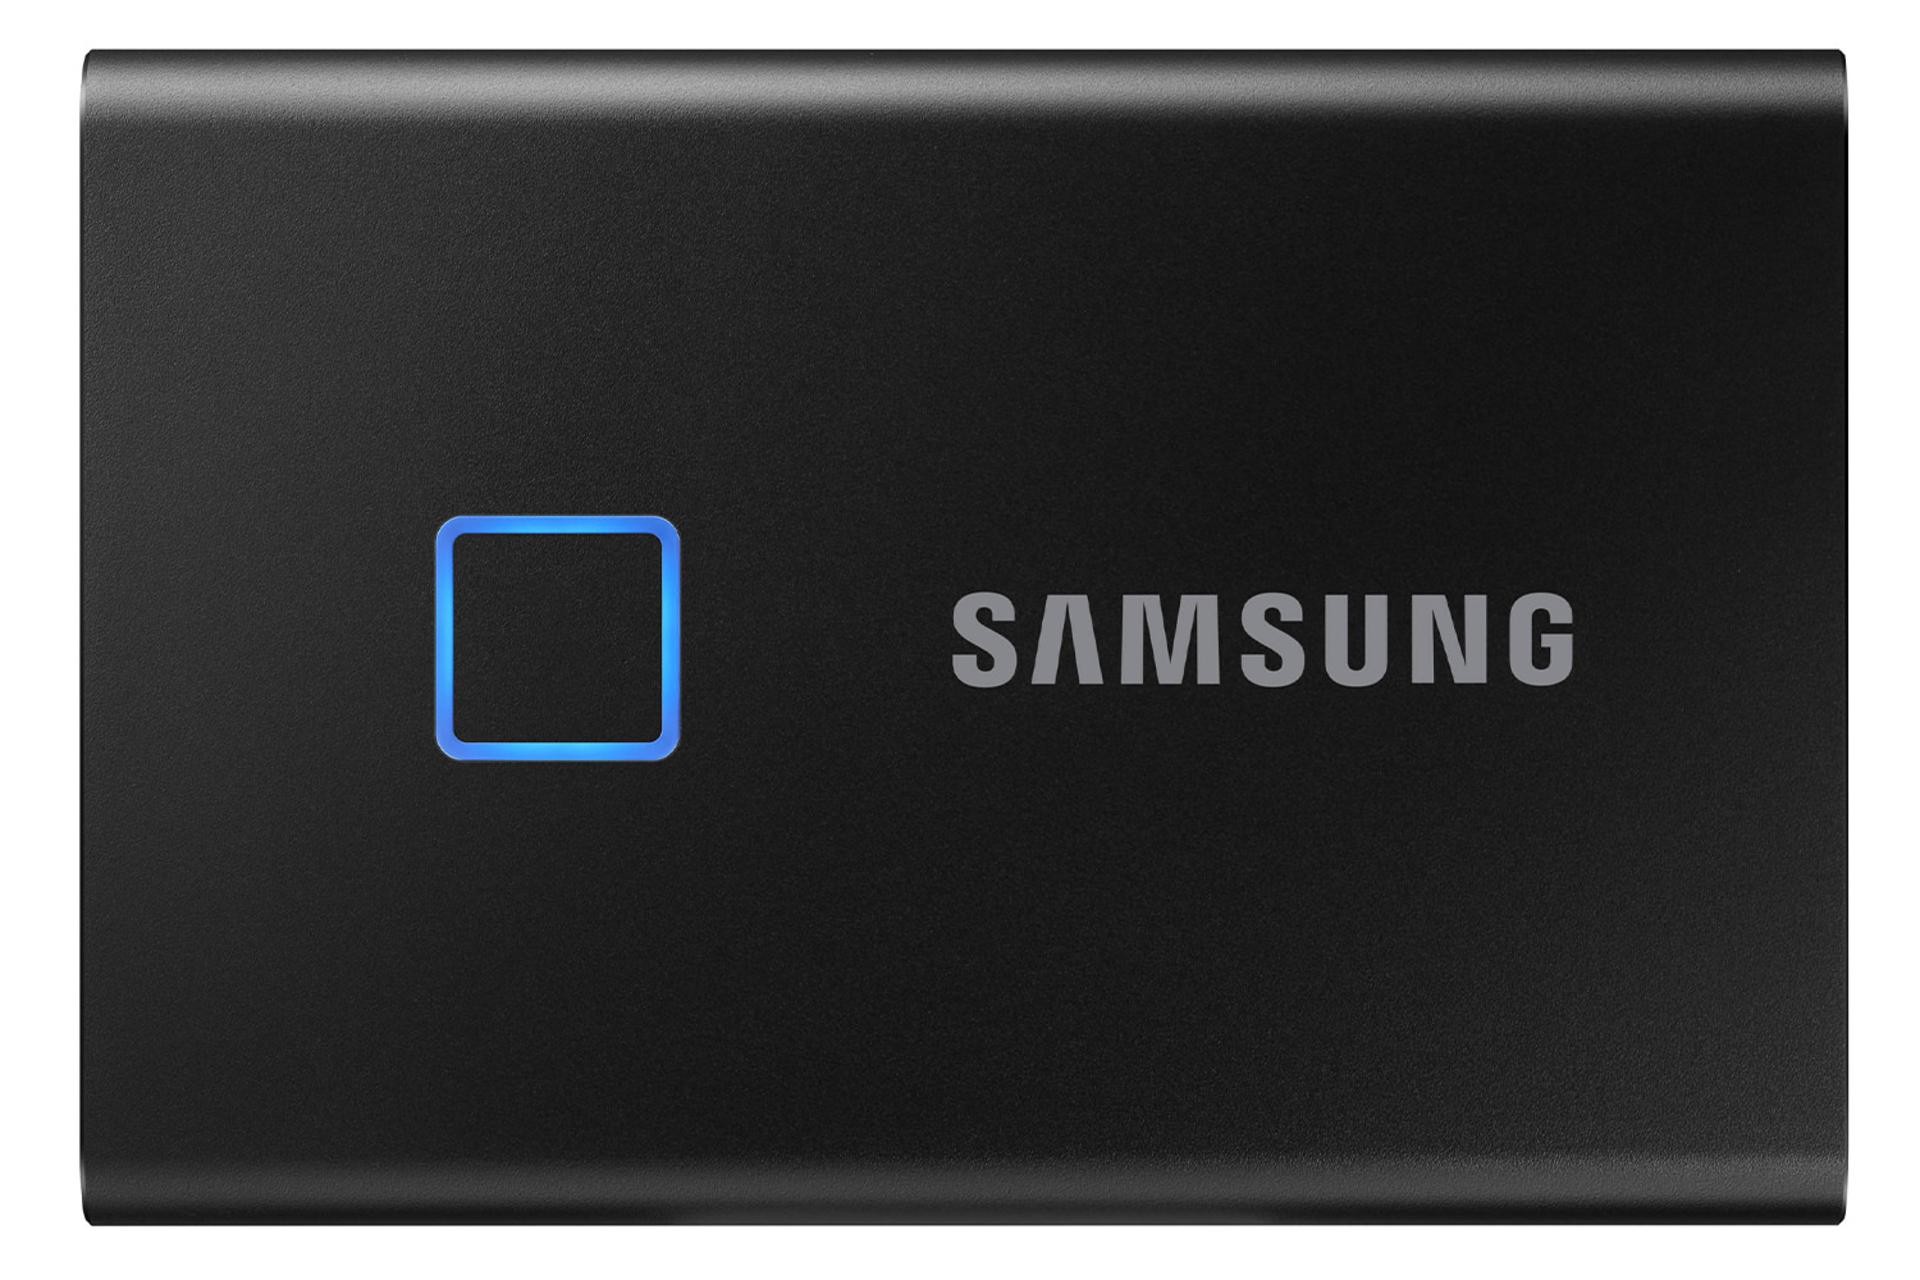 Samsung T7 Touch 500GB / سامسونگ T7 Touch ظرفیت 500 گیگابایت